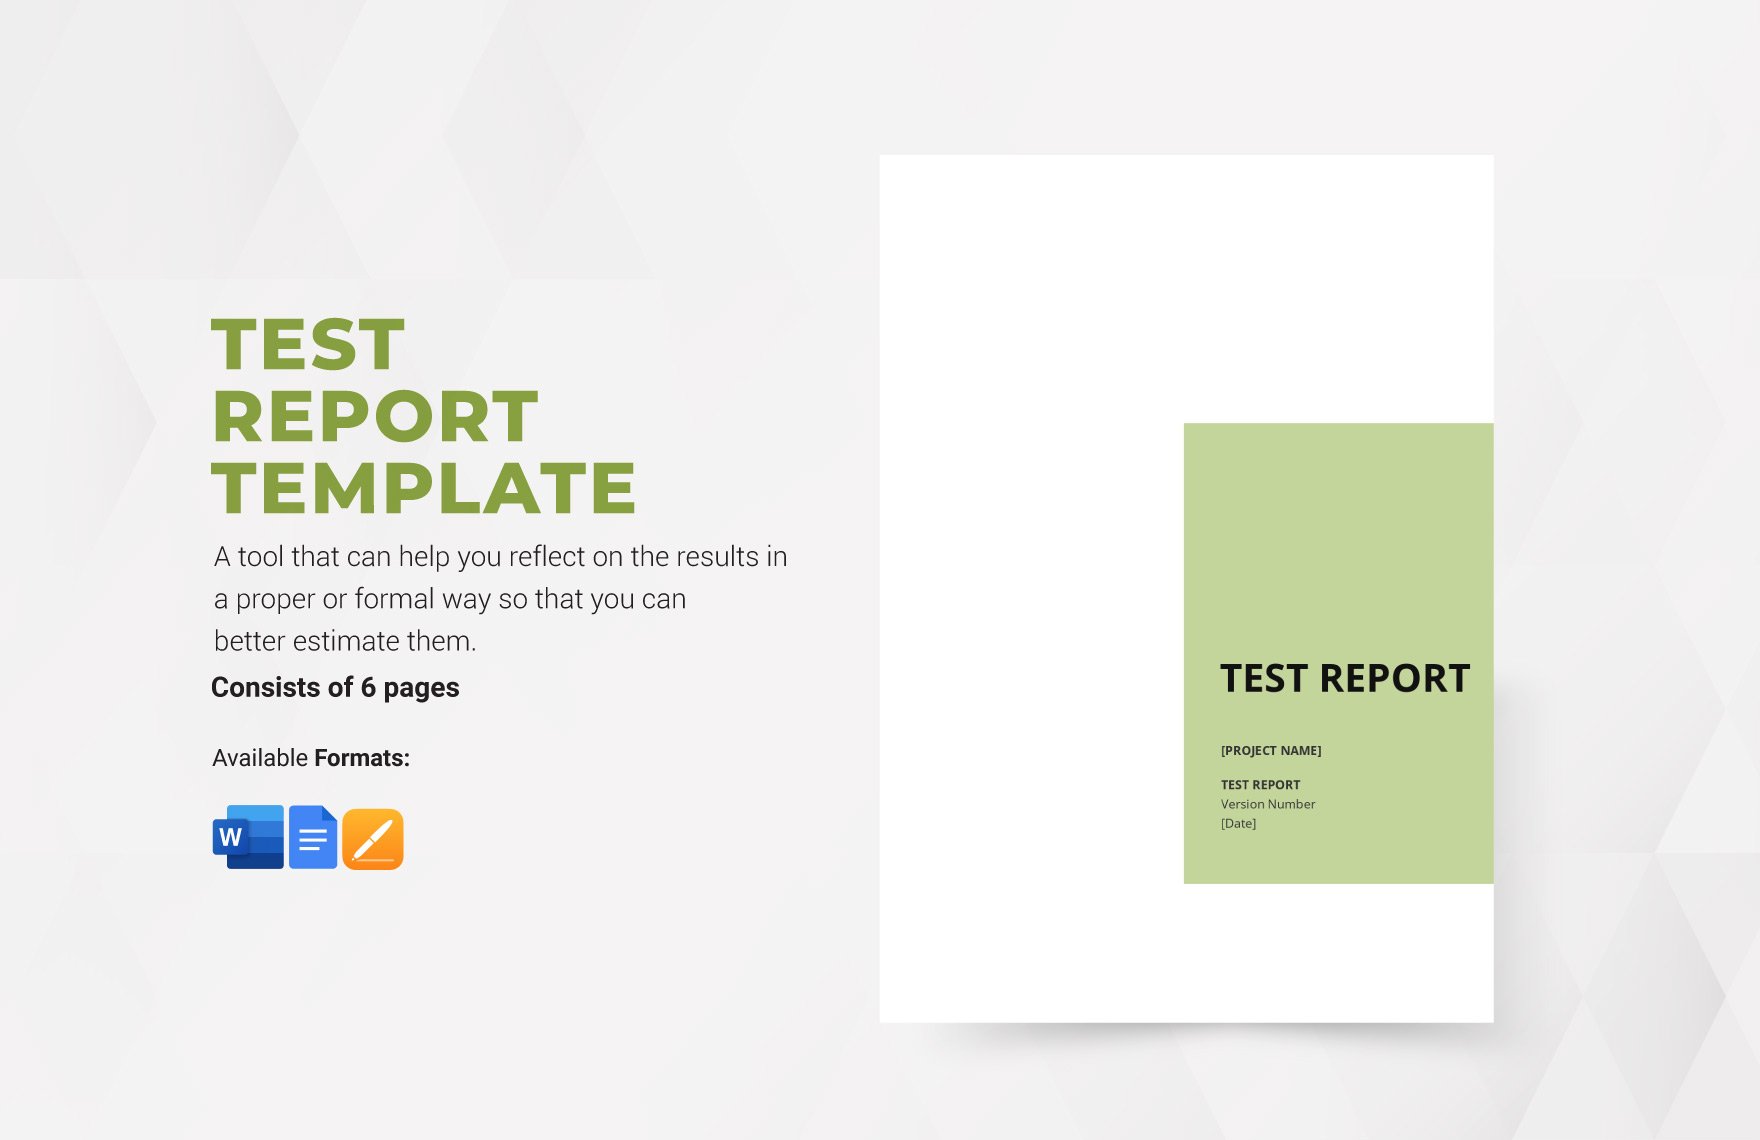 Test Report Template